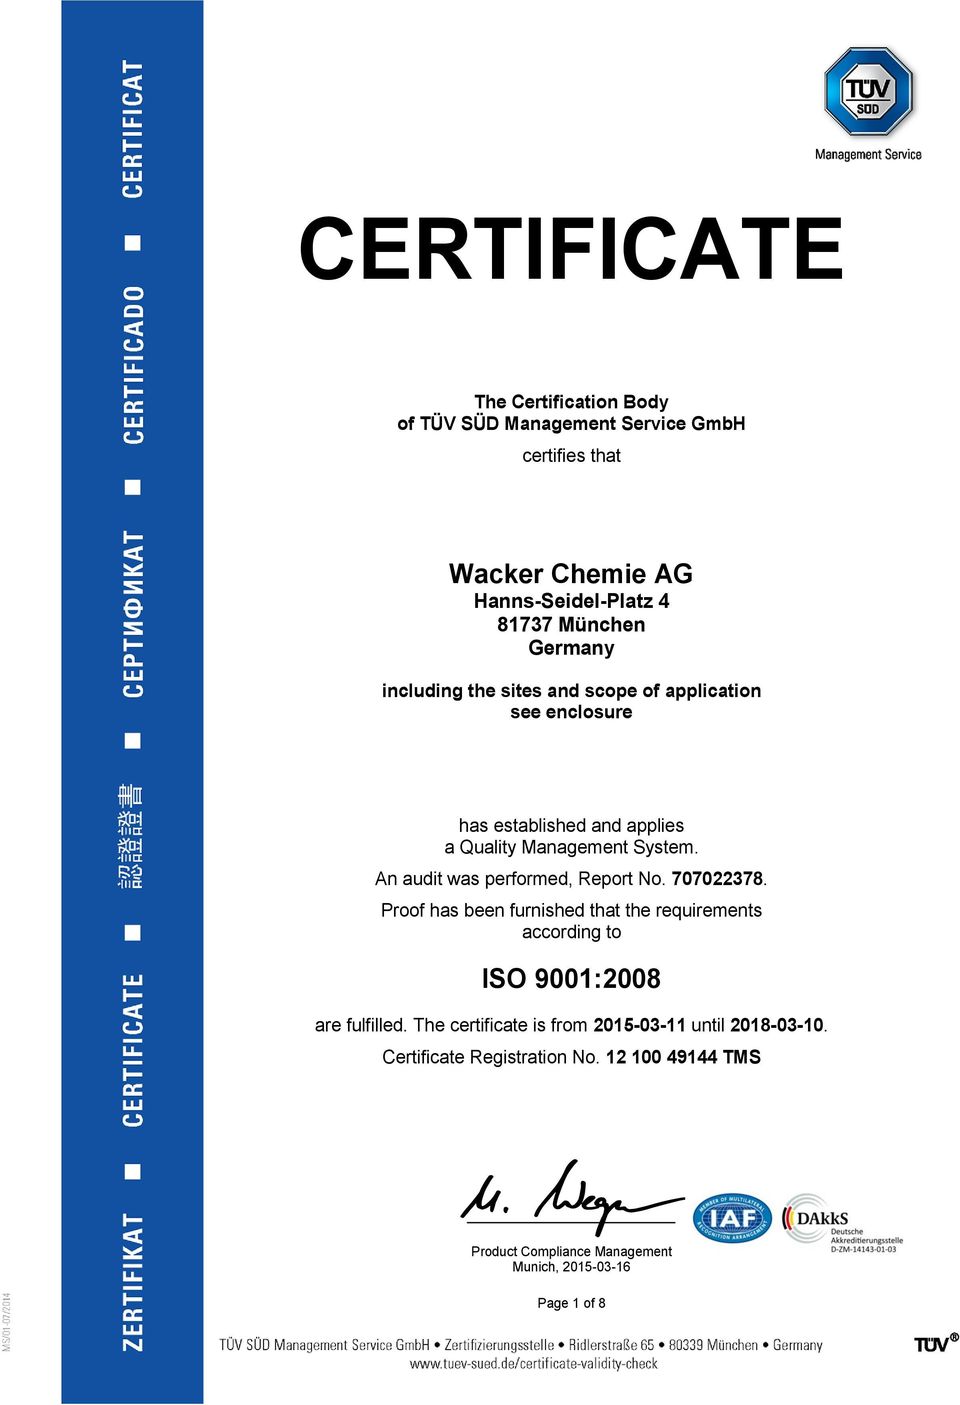 707022378. Proof has been furnished that the requirements according to ISO 9001:2008 are fulfilled.